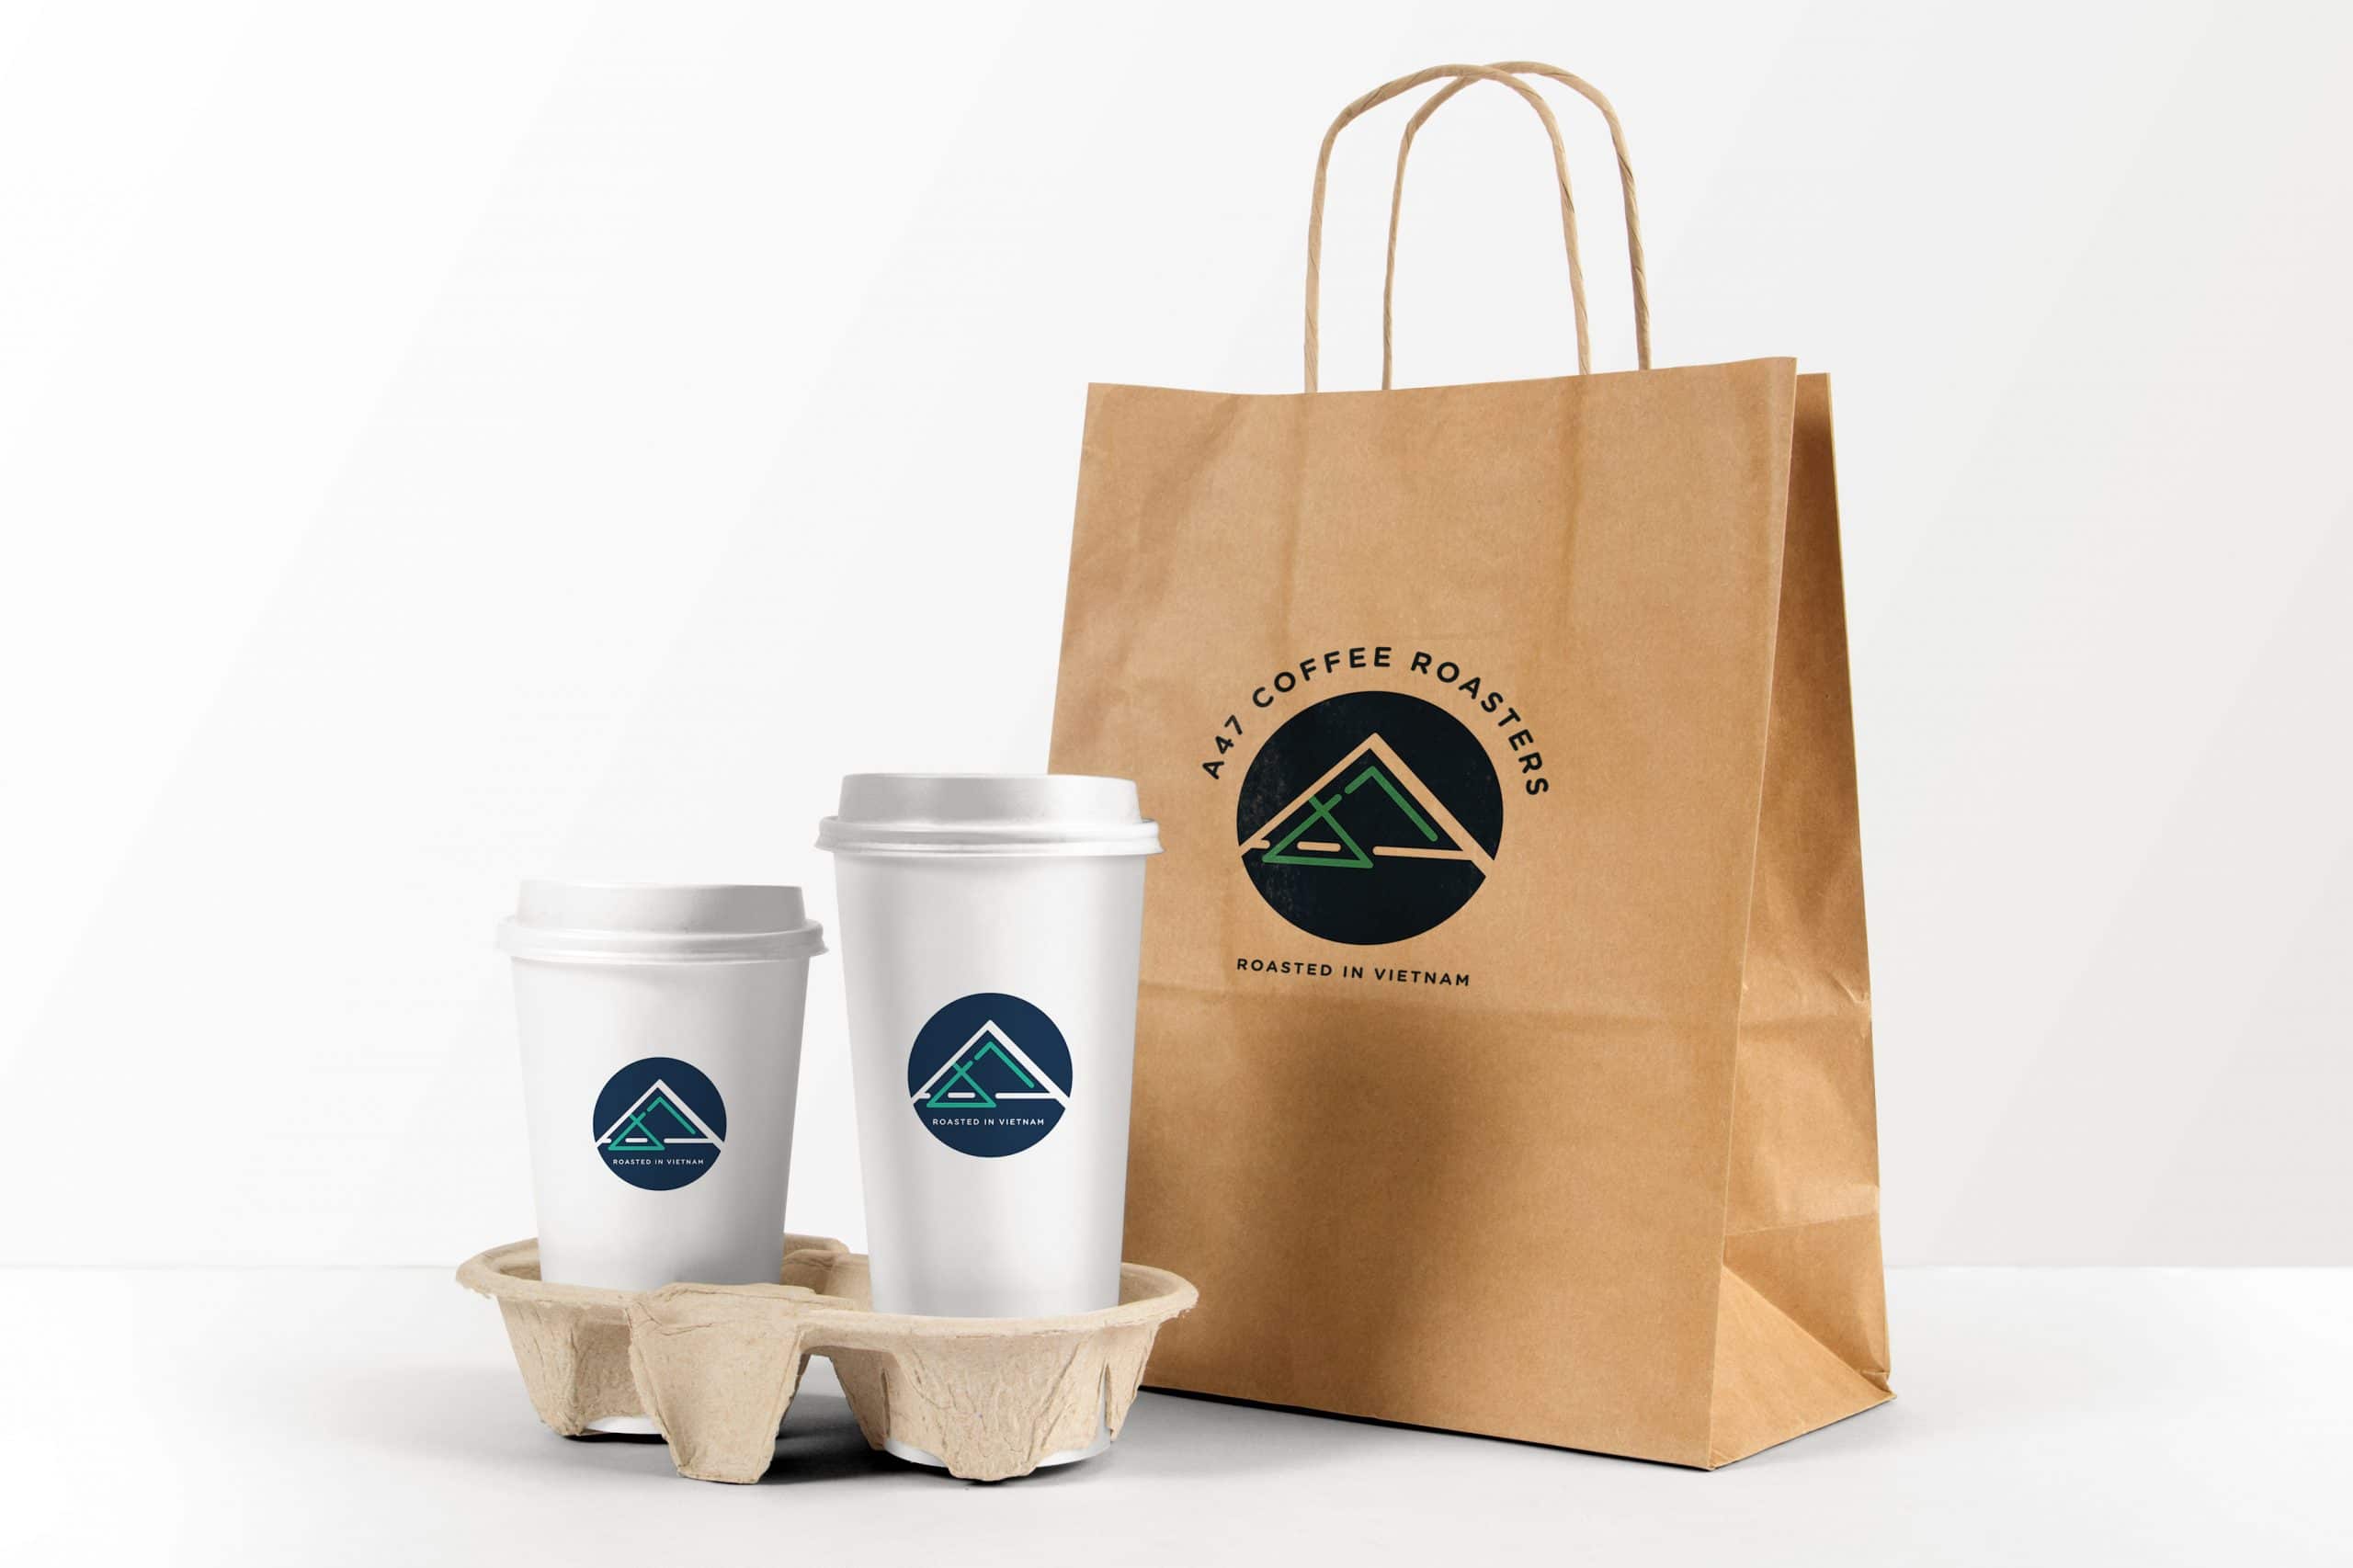 A mockup of the new A47 logo on to-go cups and bag